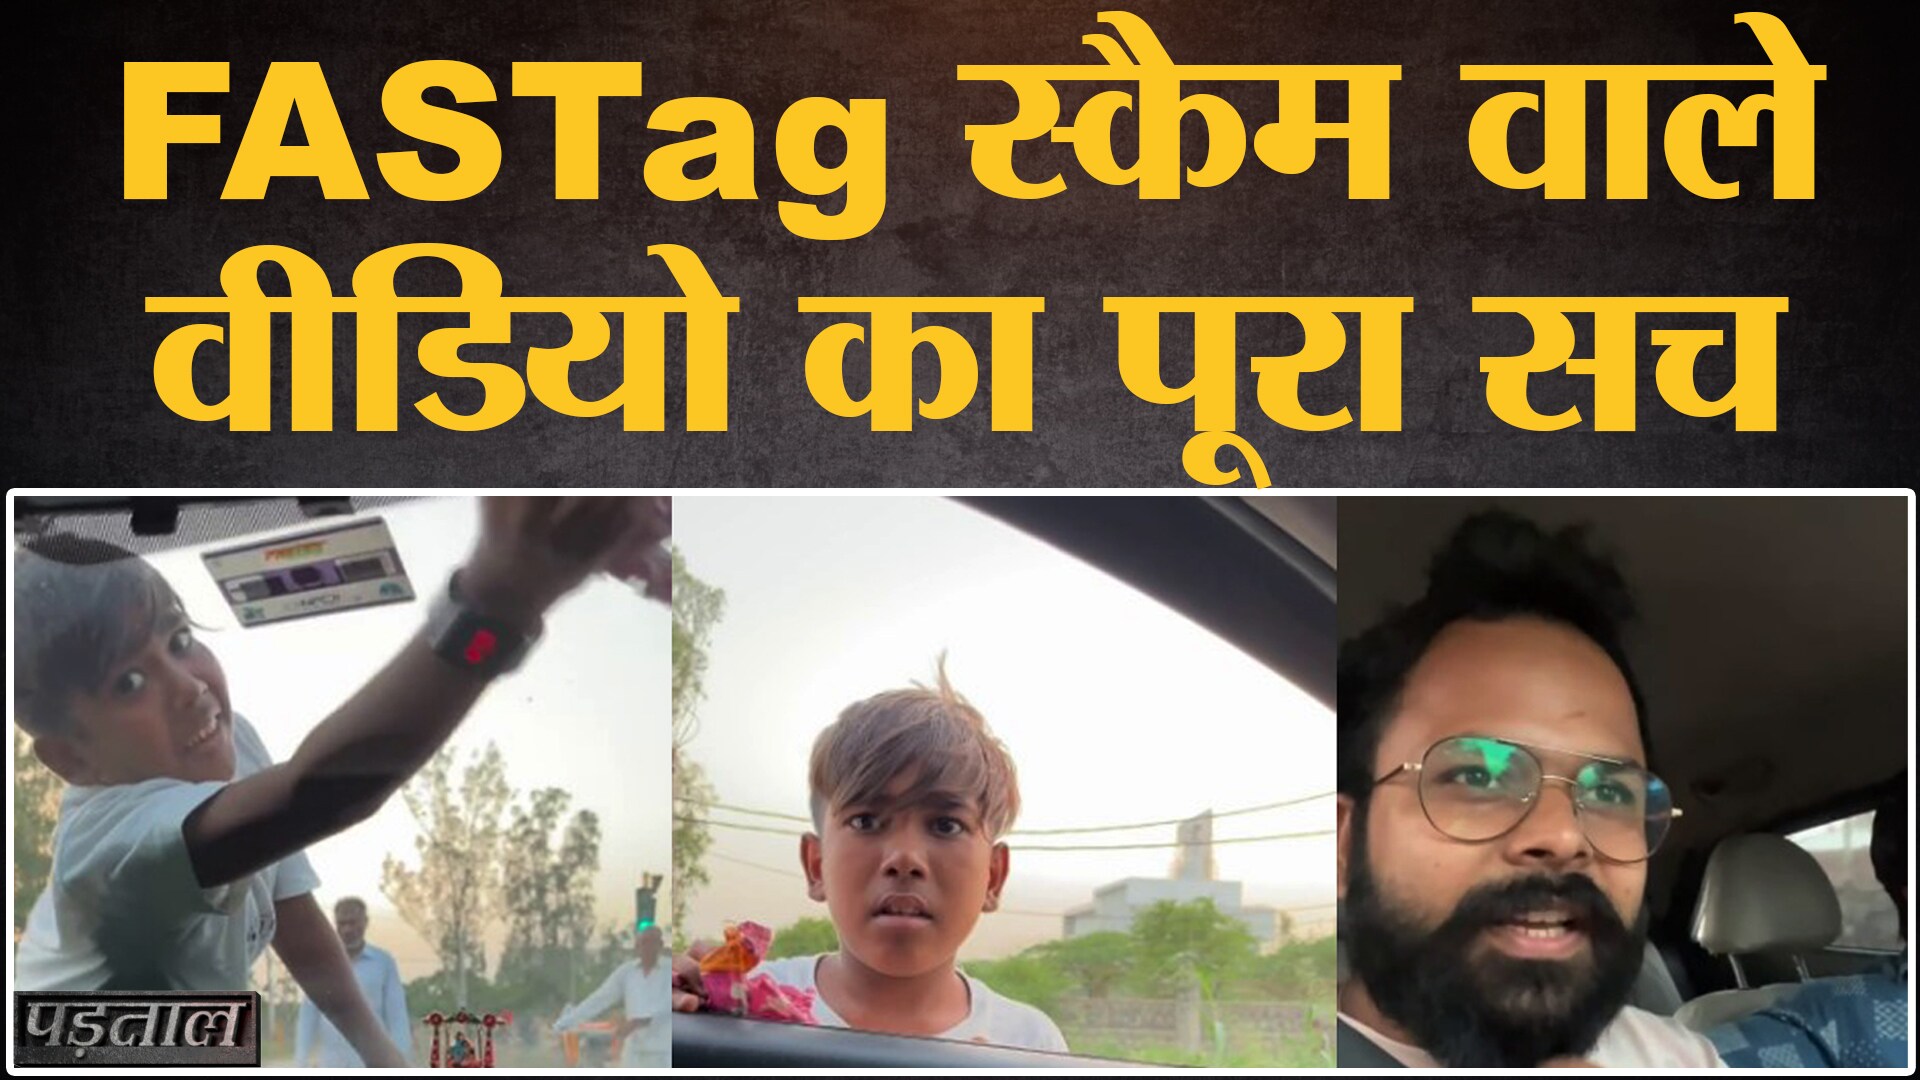 fastag scam paytm child scanned fastag from smartwatch and stole money viral video